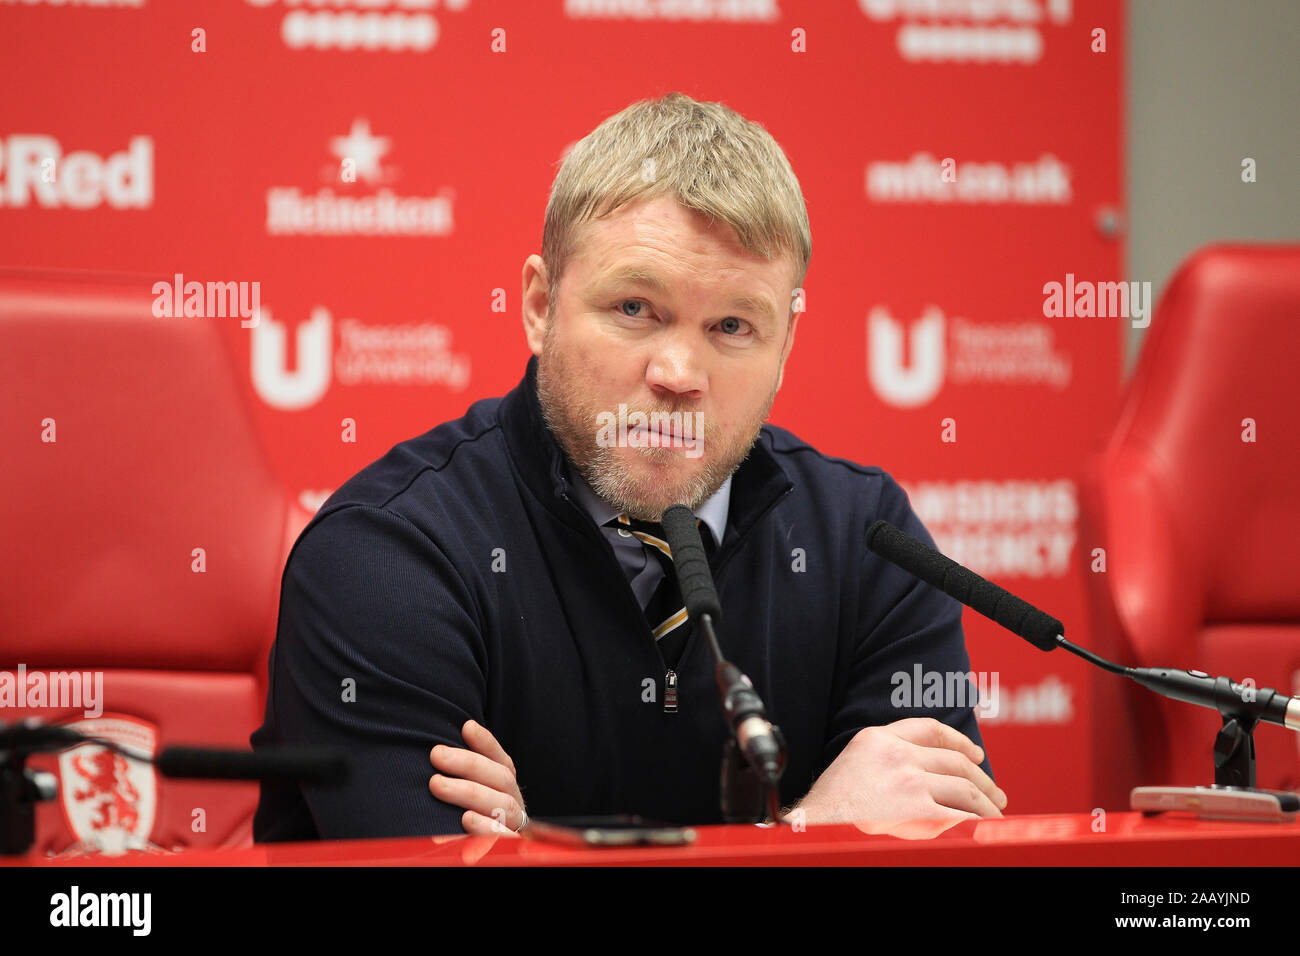 Middlesbrough, UK. 24 November 2019. Hull City manager Grant McCann speaks to the press after the Sky Bet Championship match between Middlesbrough and Hull City at the Riverside Stadium, Middlesbrough on Sunday 24th November 2019. Stock Photo